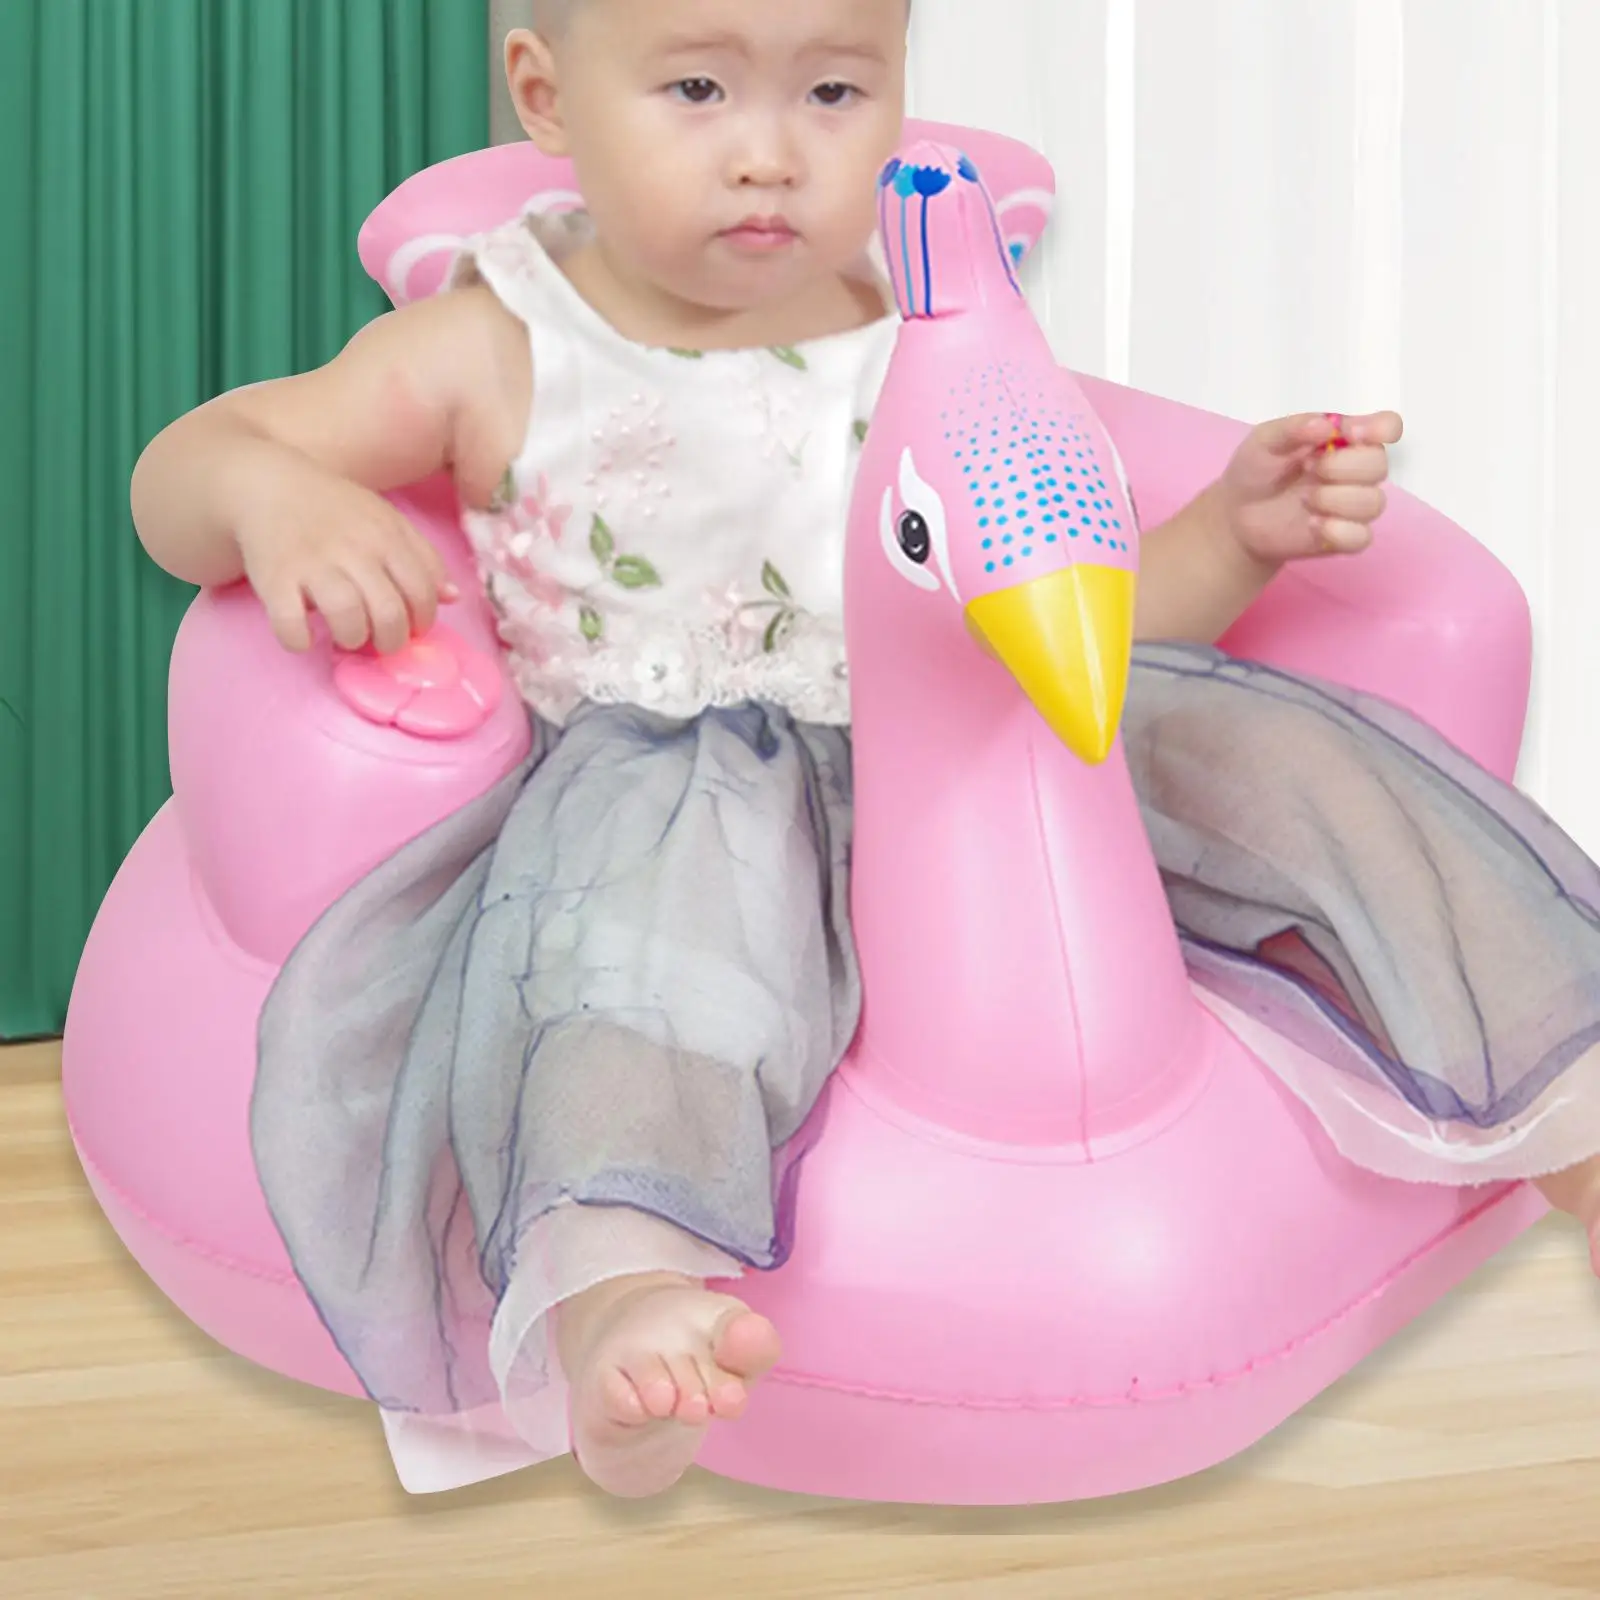 Baby Inflatable Seat Toddler Chair for Sitting up Baby Shower Chair Floor Seater Floor Seat 3 Months and up baby Seat